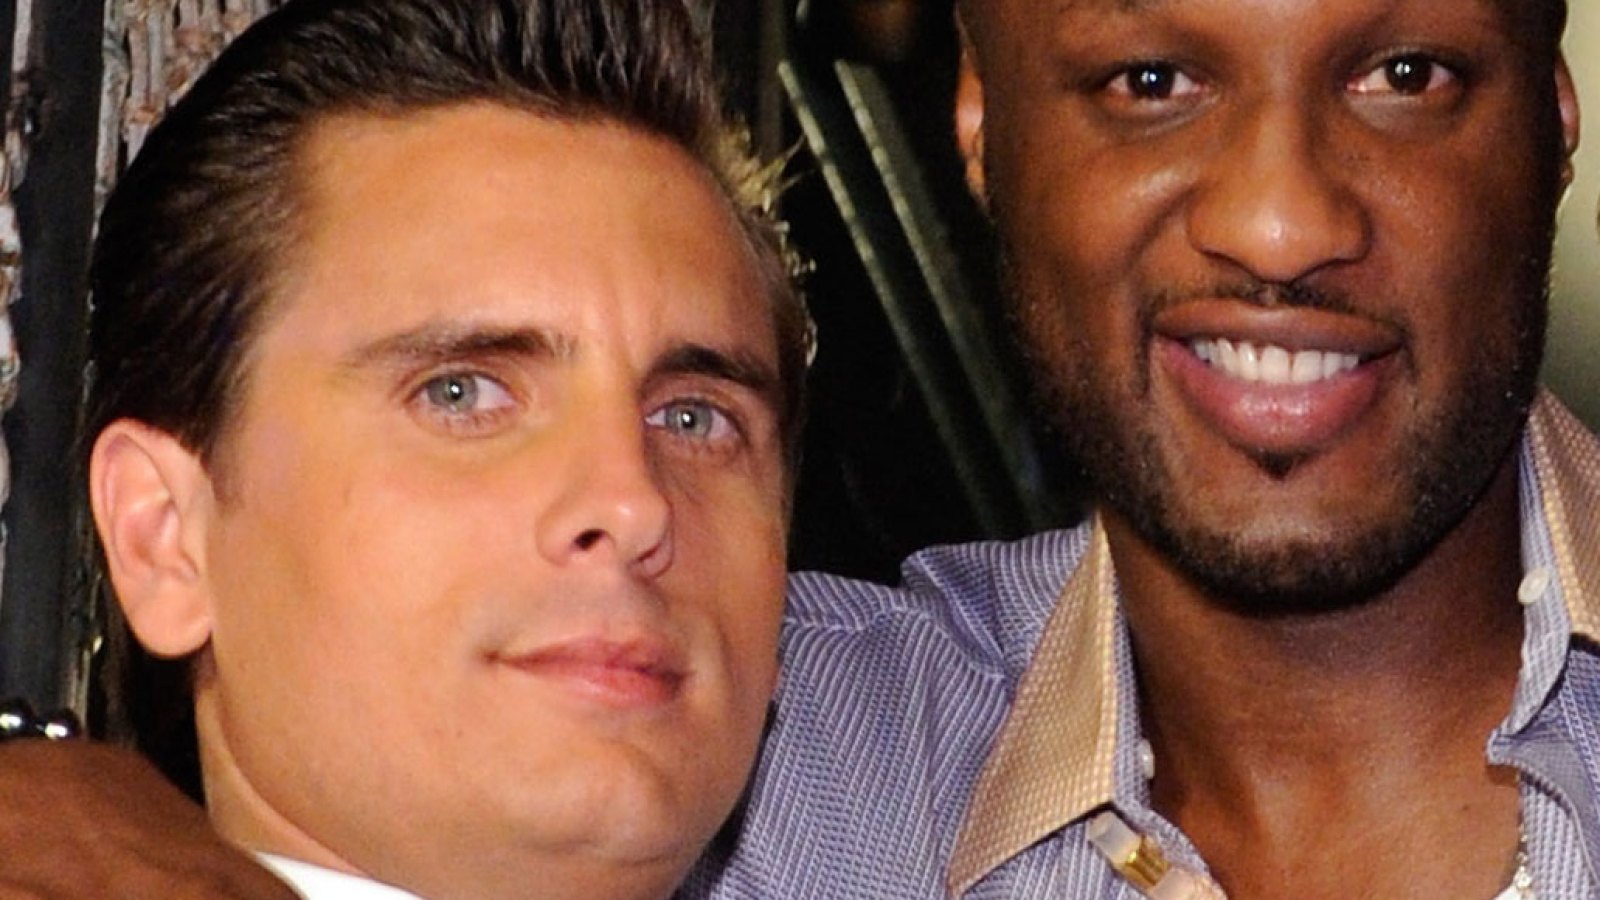 Lamar Odom and Scott Disick, pictured together here in 2011, attended Robert Kardashian's birthday meal